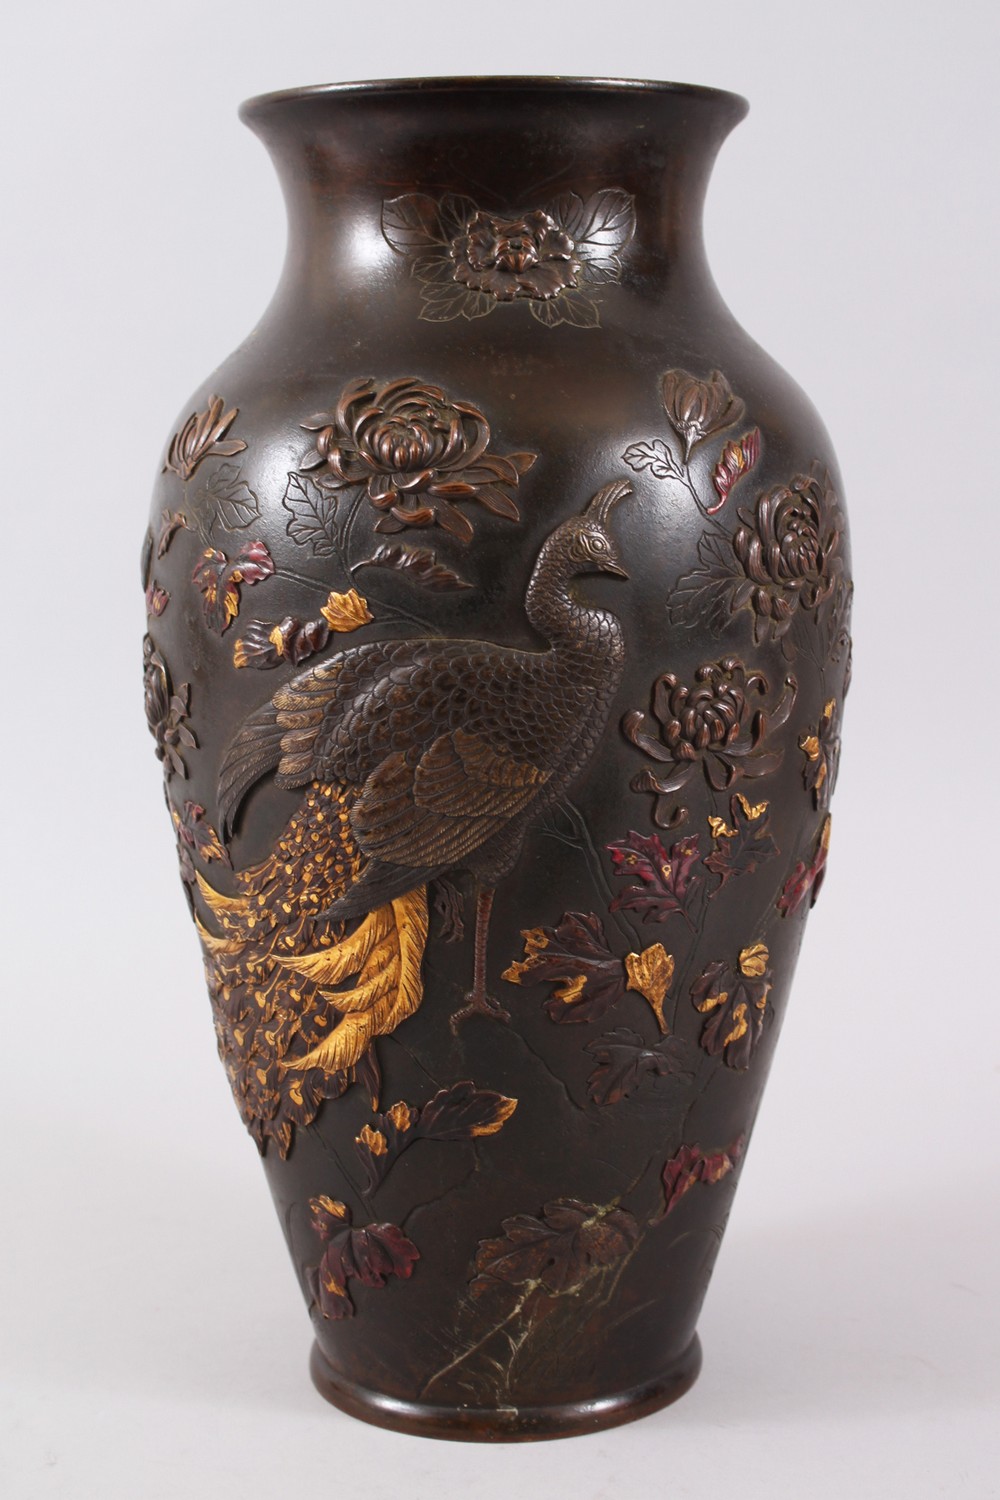 A GOOD JAPANESE MEIJI PERIOD BRONZE & MIXED METAL ONLAID VASE, depicting scenes of a peacock stood